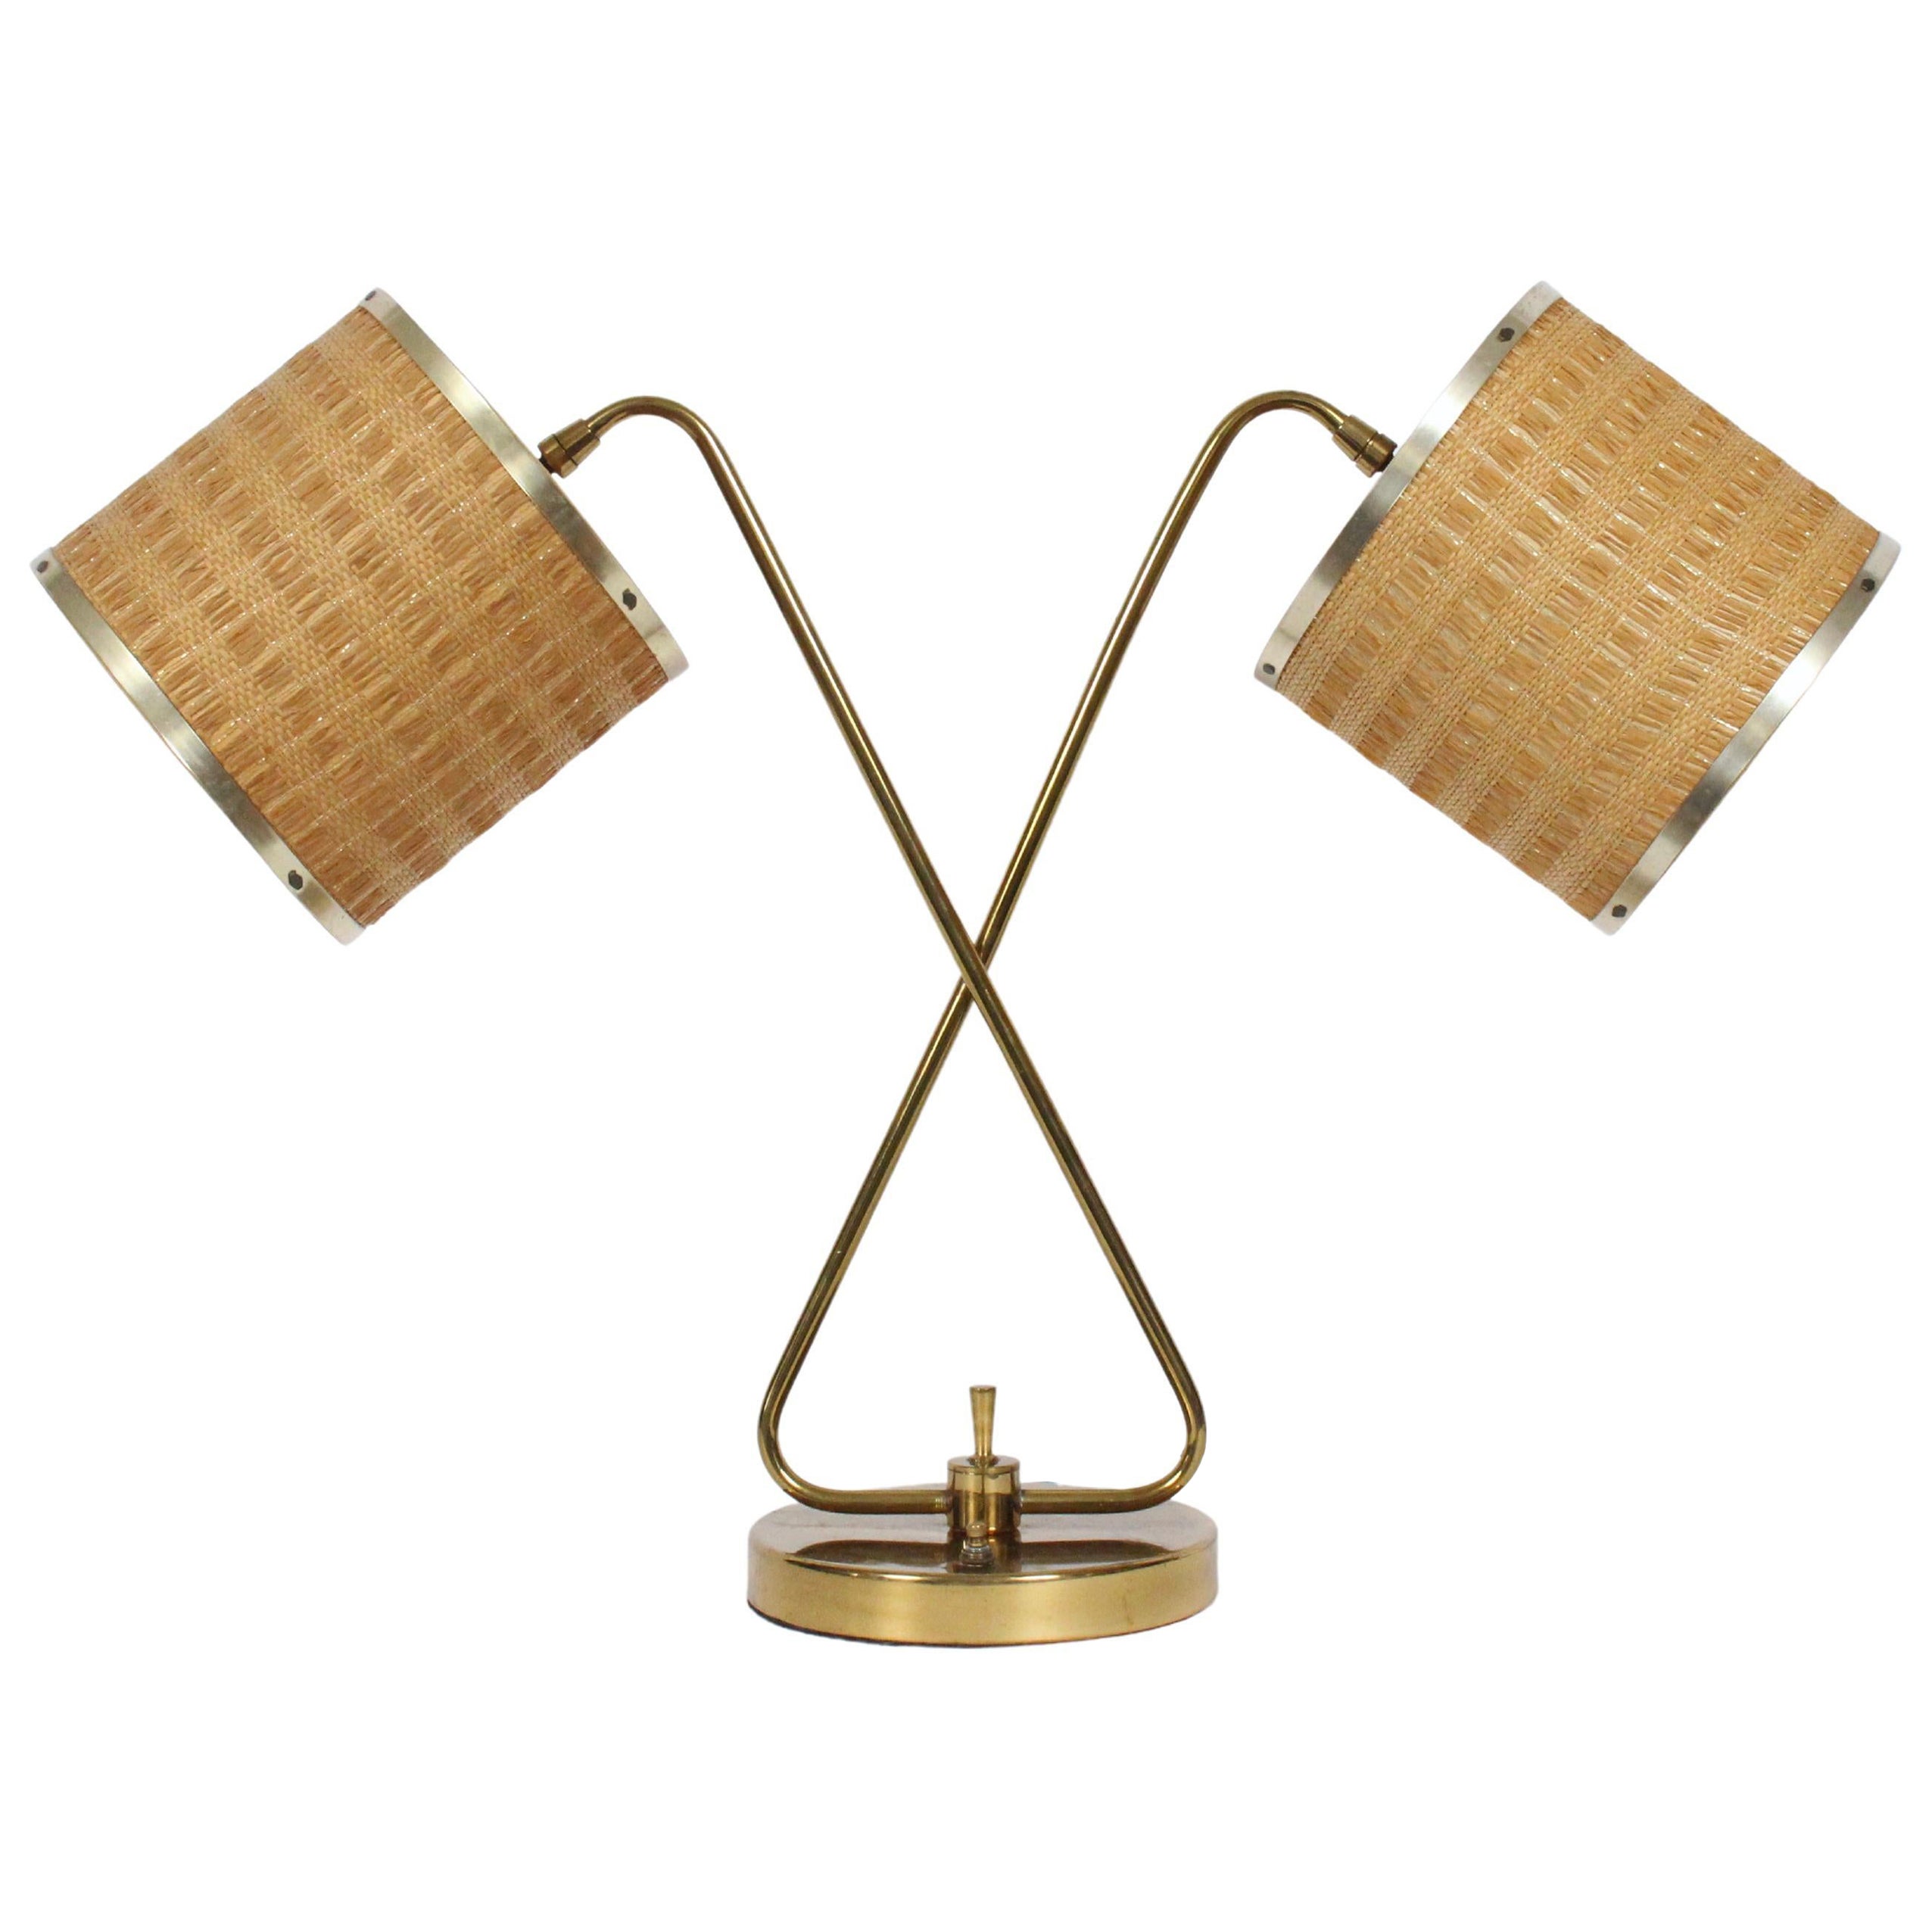 Gerald Thurston Brass Crossed Sword Dual Shade Partners Desk Lamp, 1950's For Sale